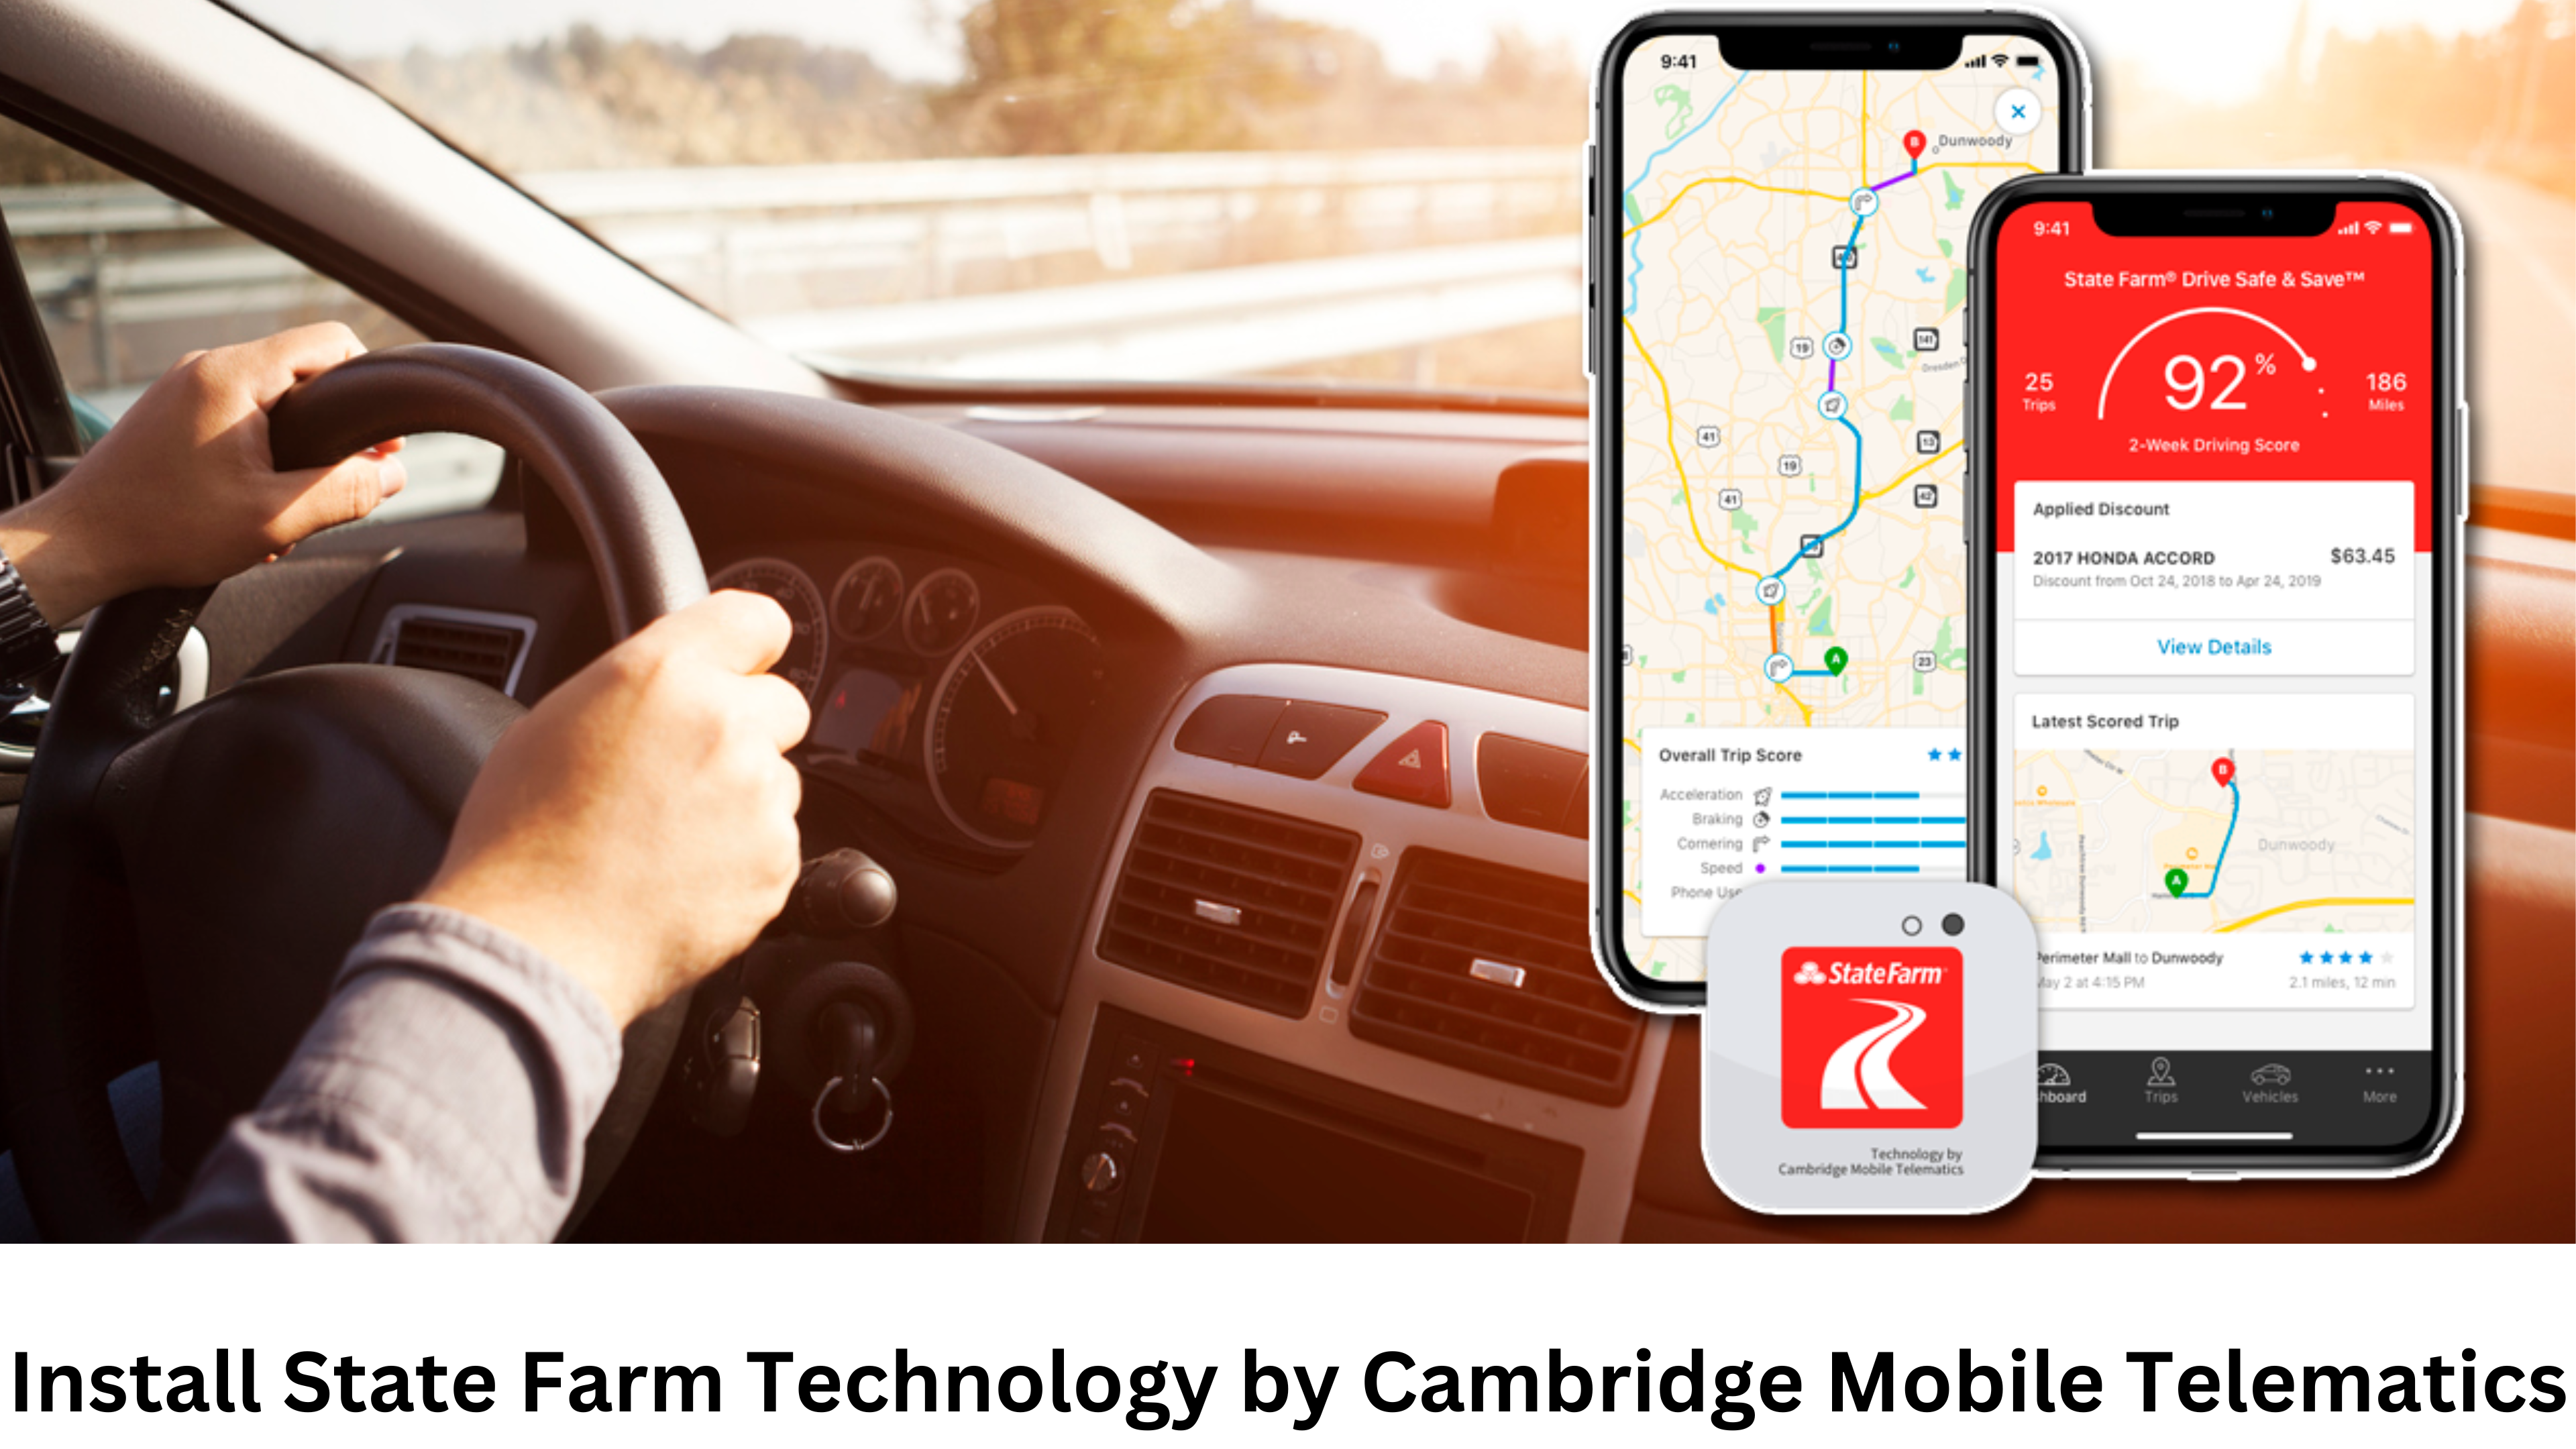 10 Easy Steps to Install State Farm Technology by Cambridge Mobile Telematics